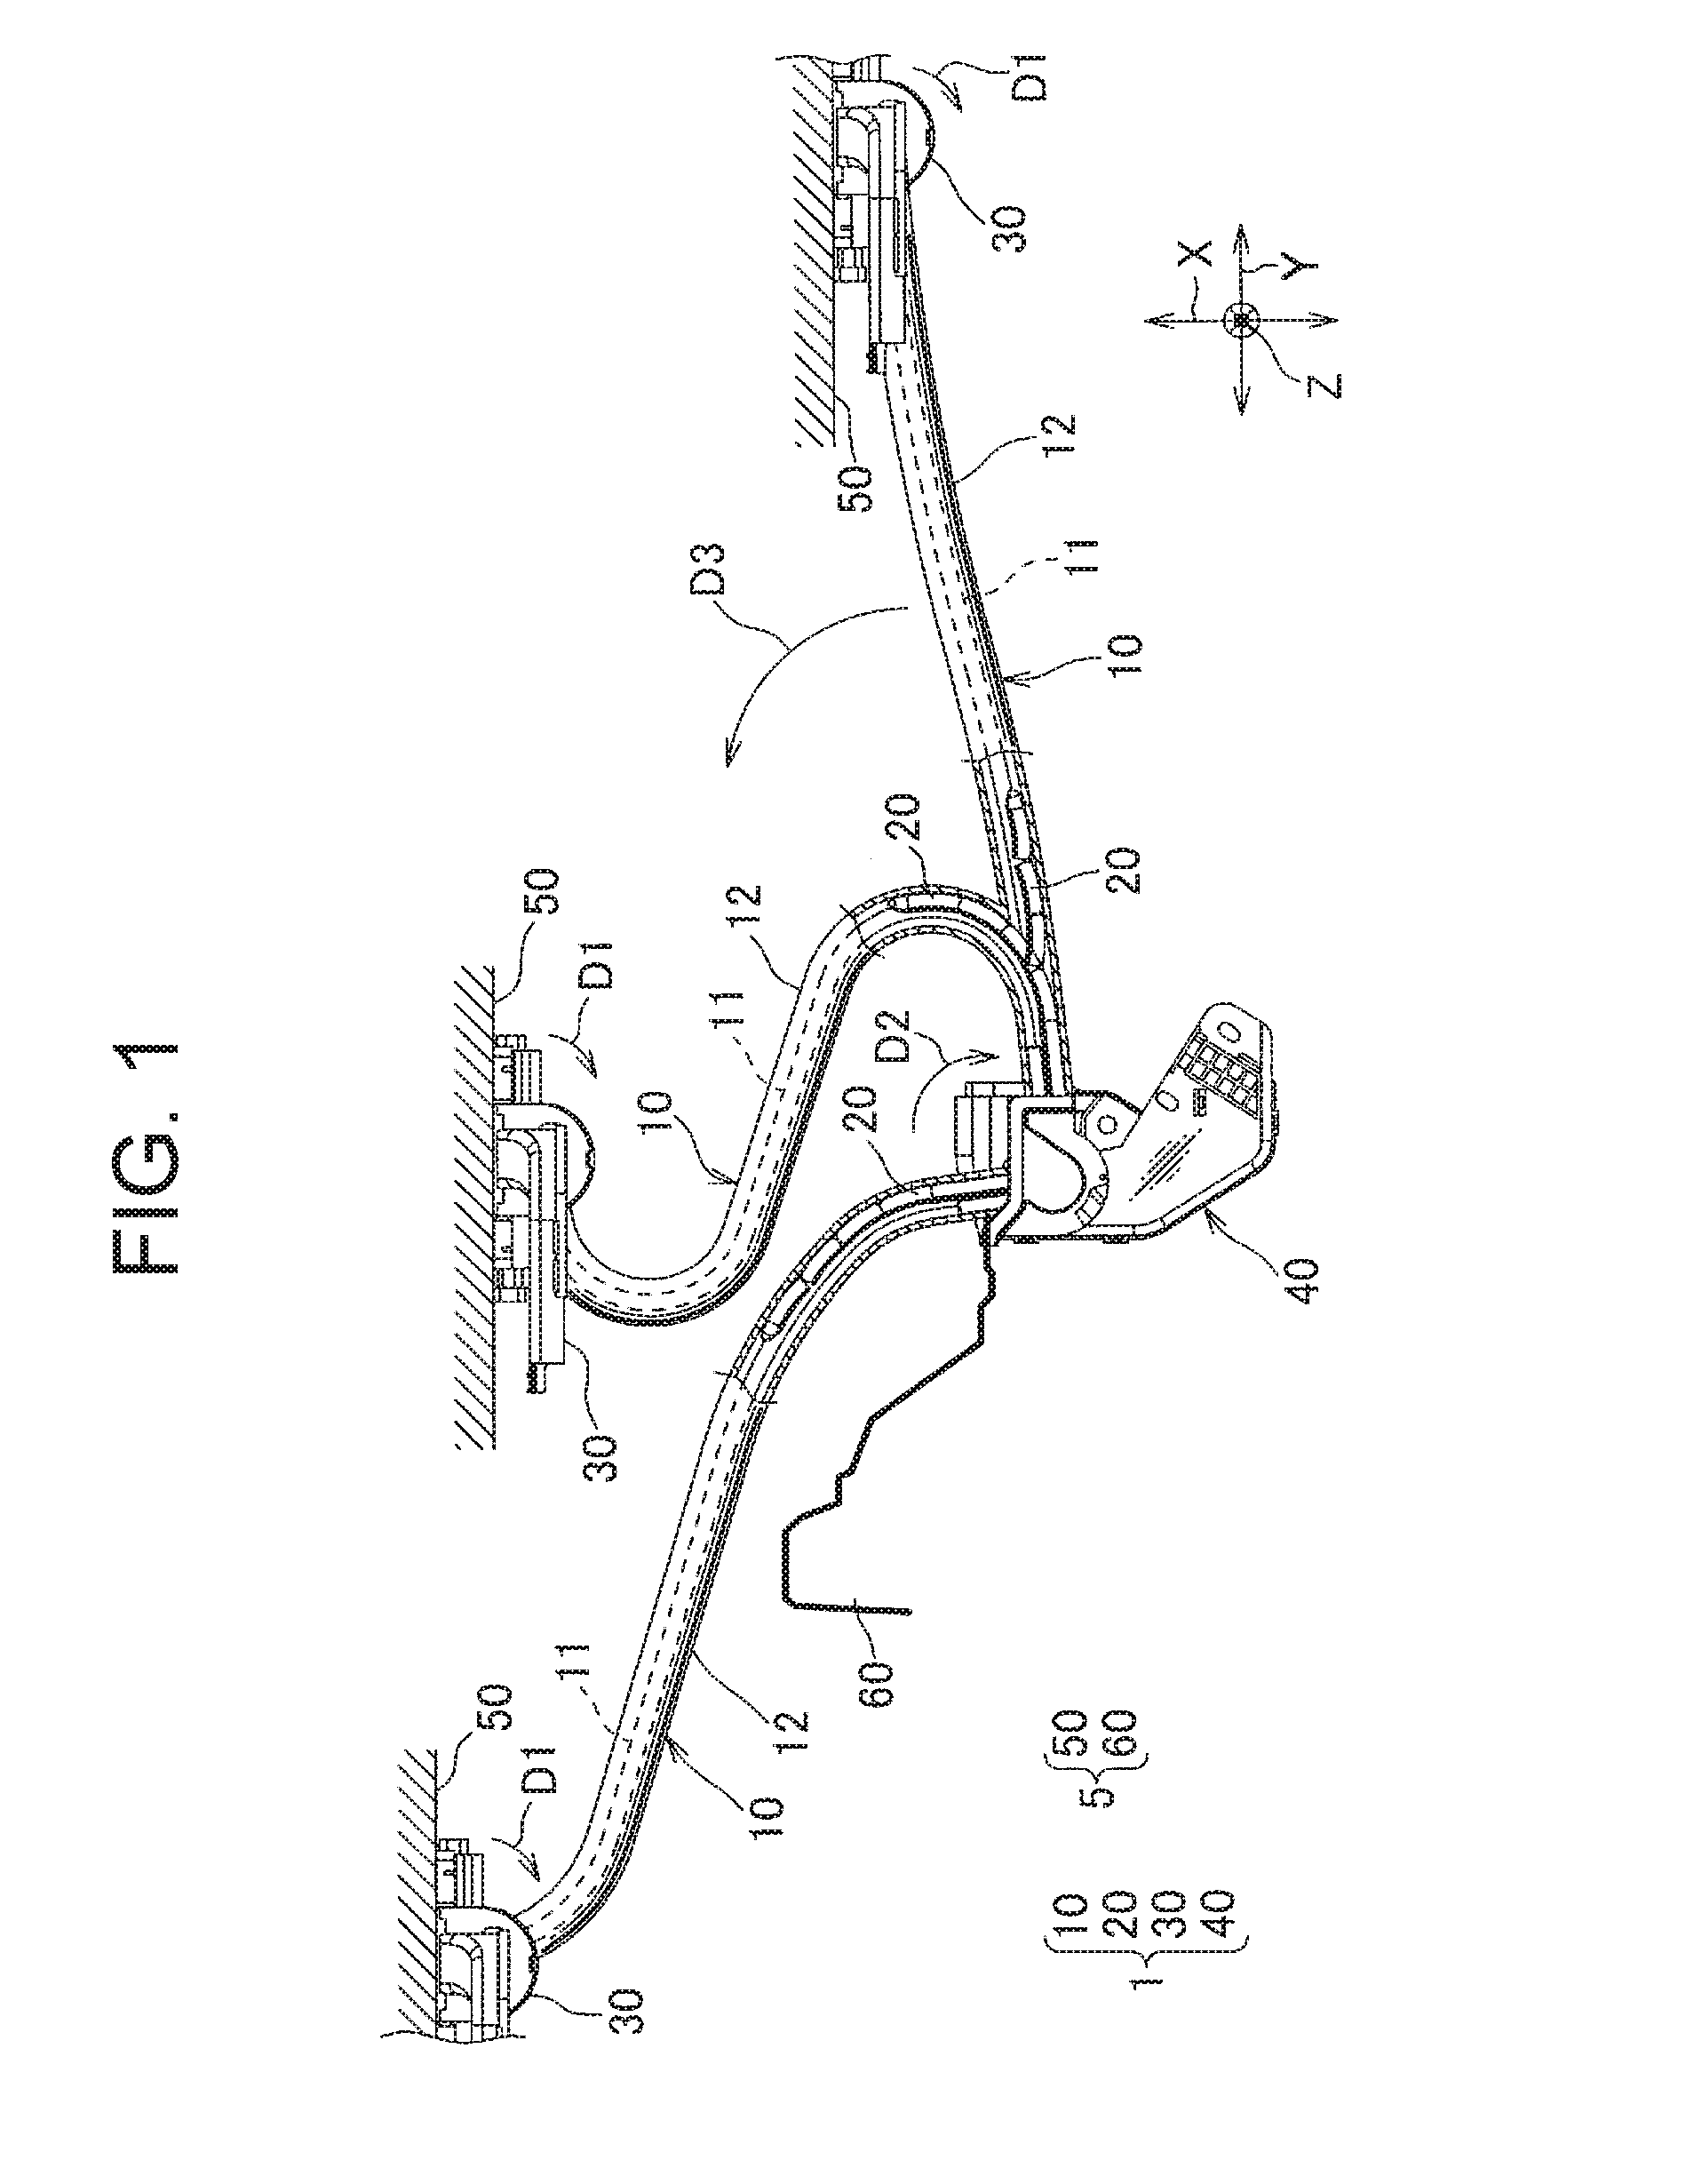 Curvature restraining member and power feeding device